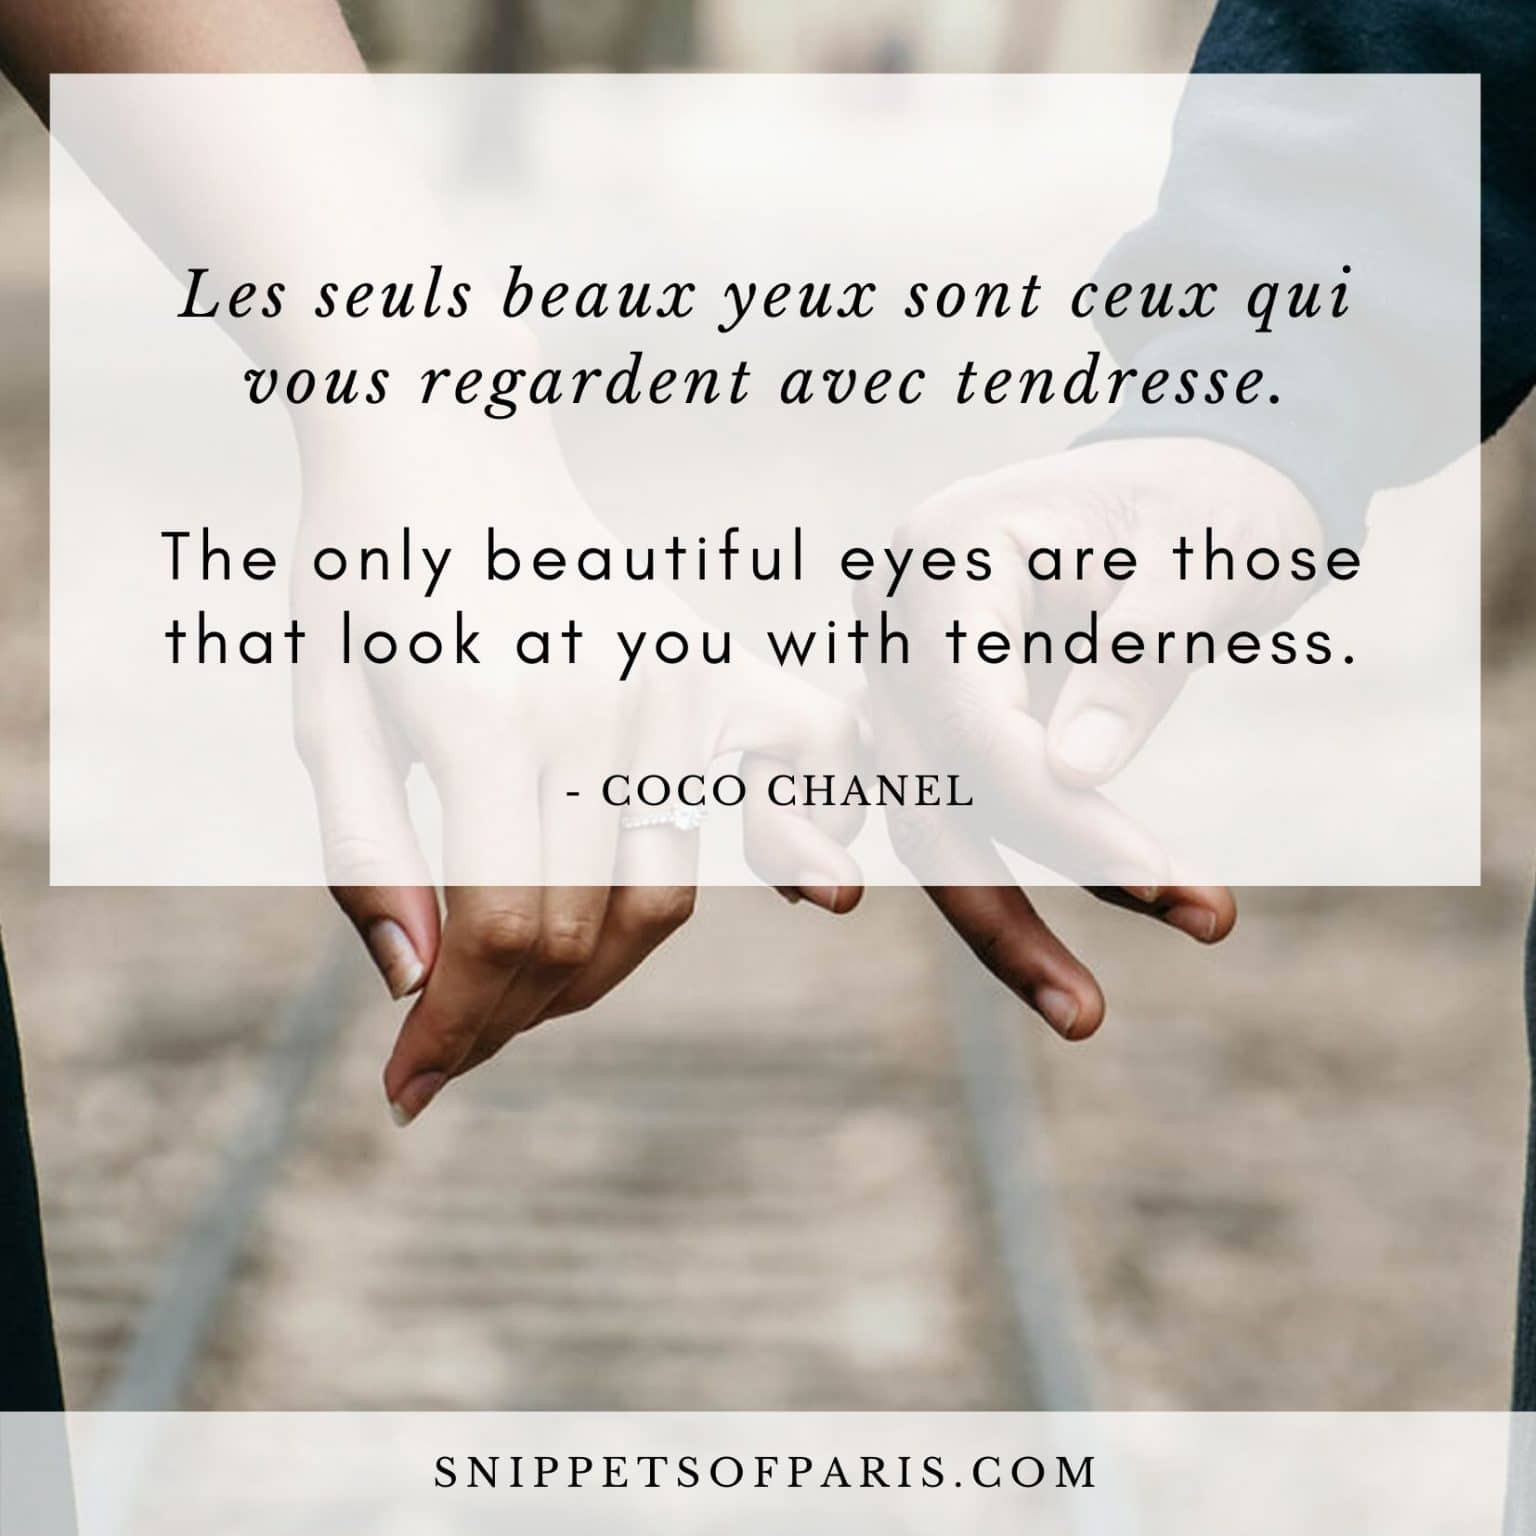 Romantic French Quotes
 31 French Romantic Quotes About Love To Make Your Heart